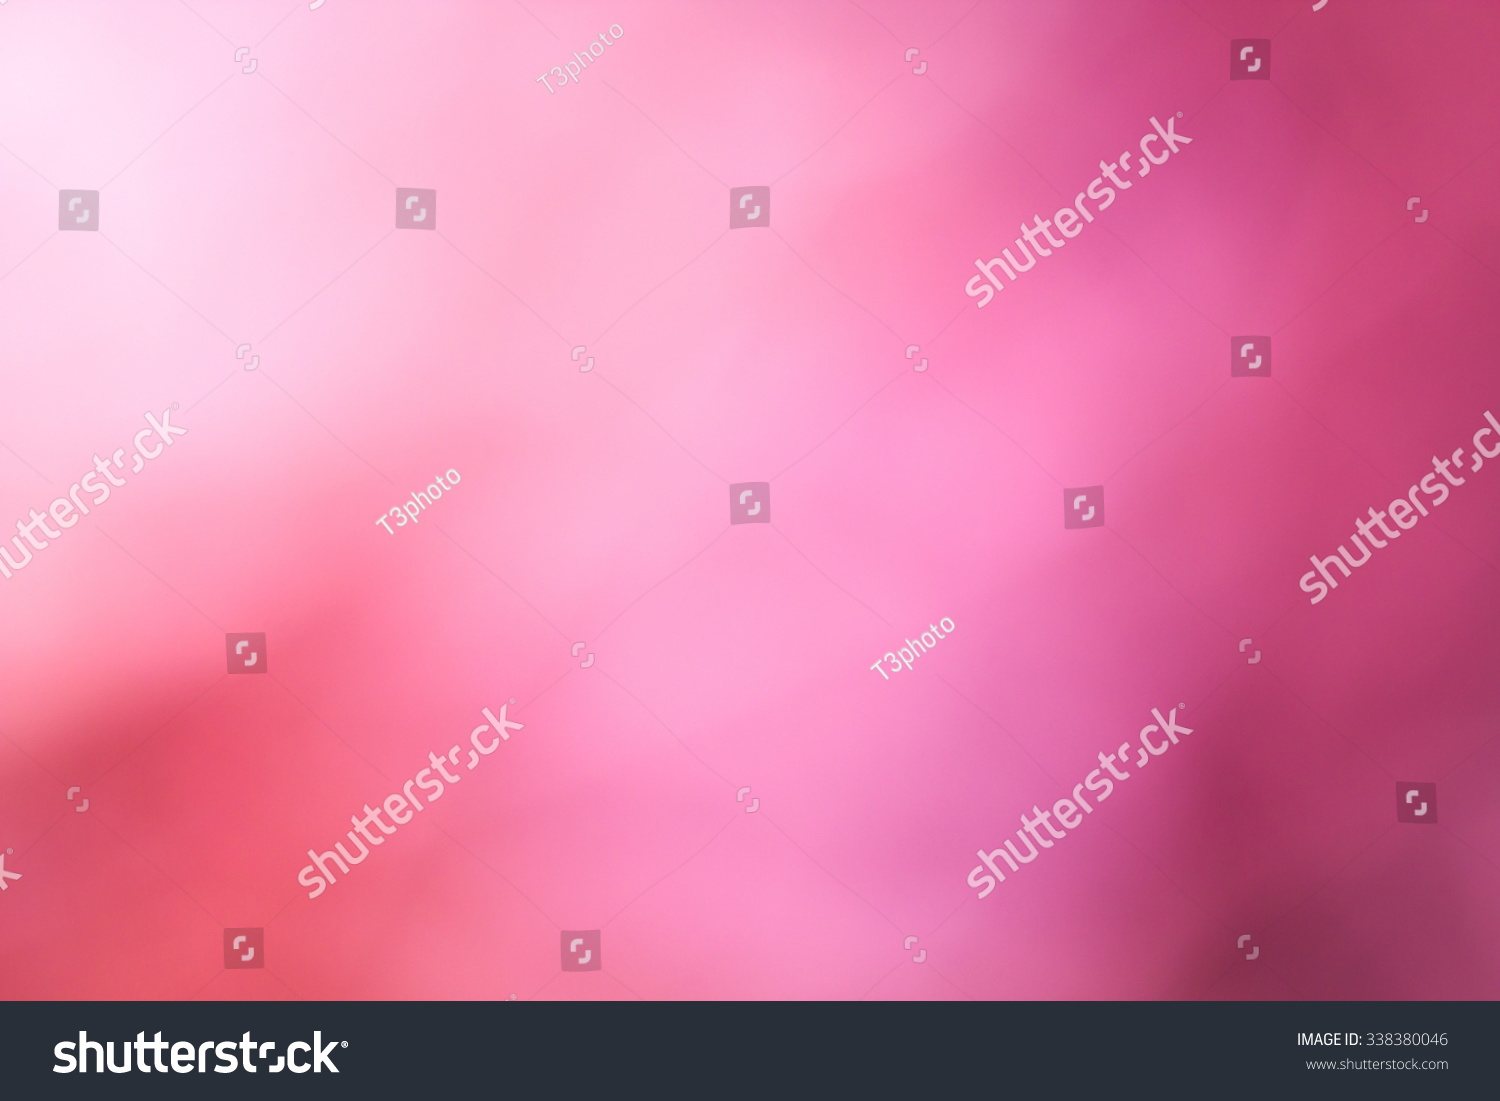 colorful blurred backgrounds / pink background #338380046